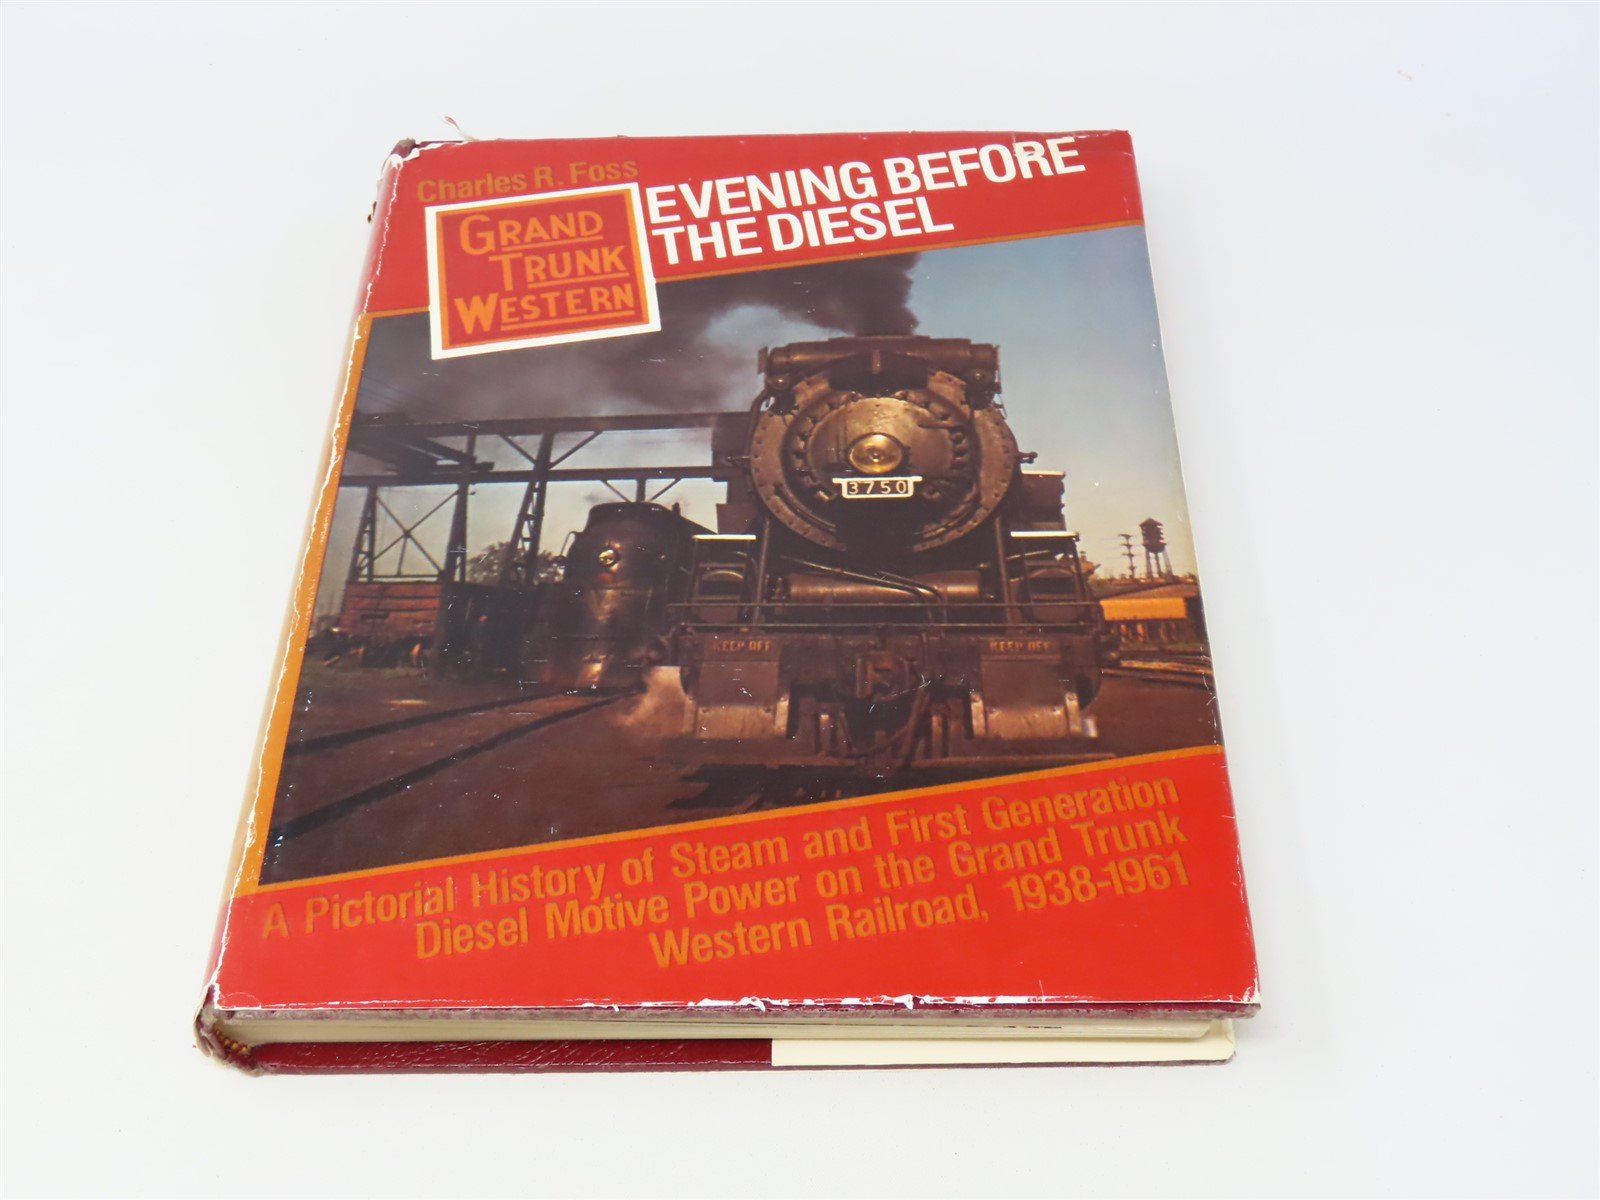 Evening Before the Diesel Grand Trunk Western by Charles R. Foss ©1980 HC Book